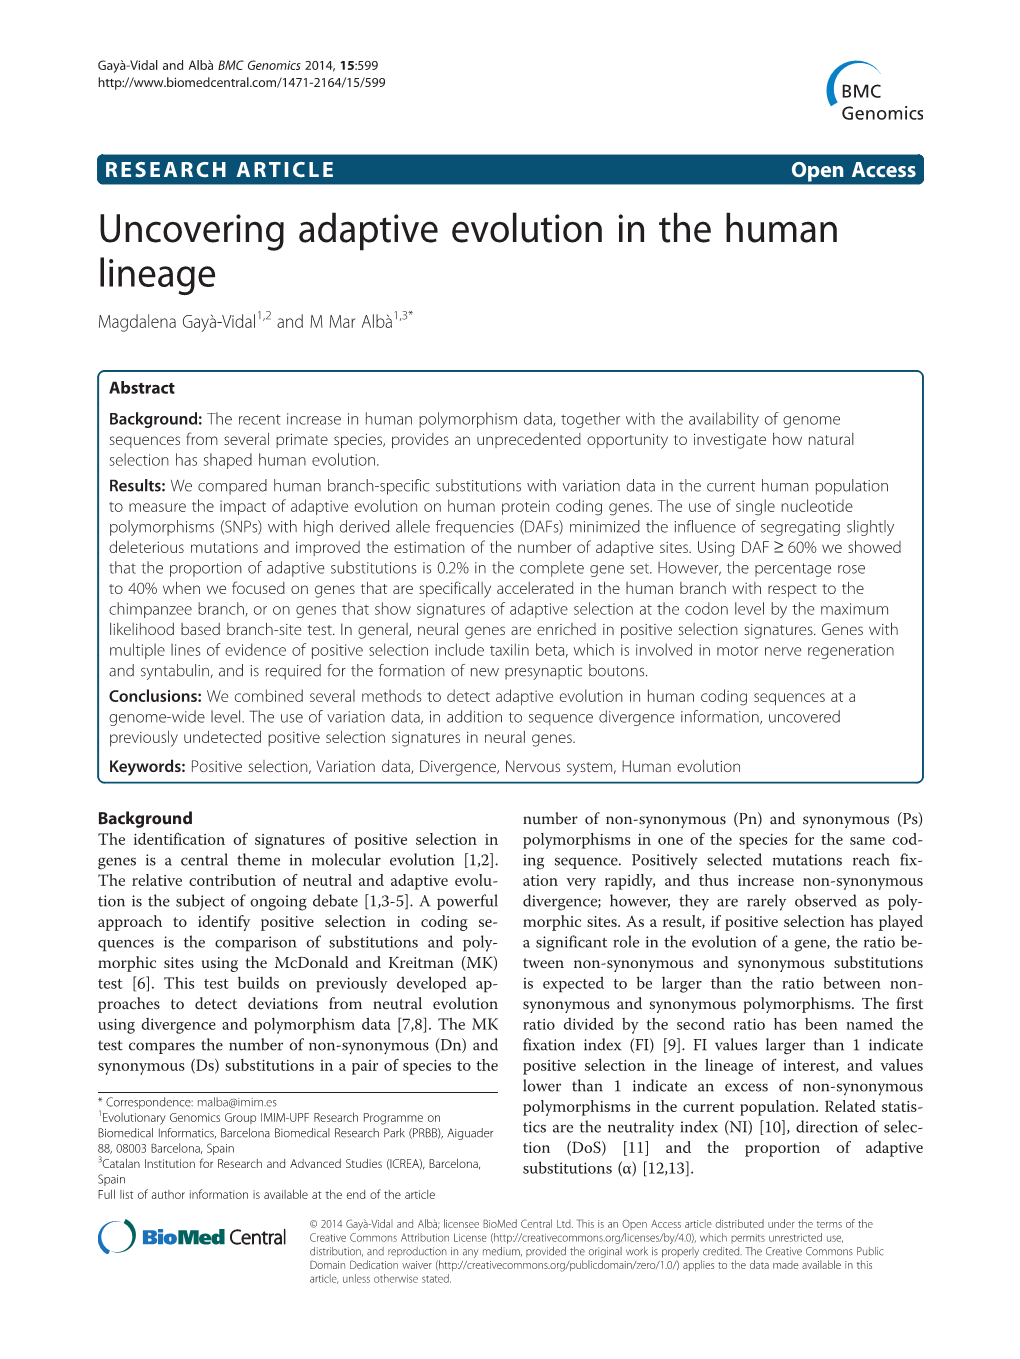 Uncovering Adaptive Evolution in the Human Lineage Magdalena Gayà-Vidal1,2 and M Mar Albà1,3*